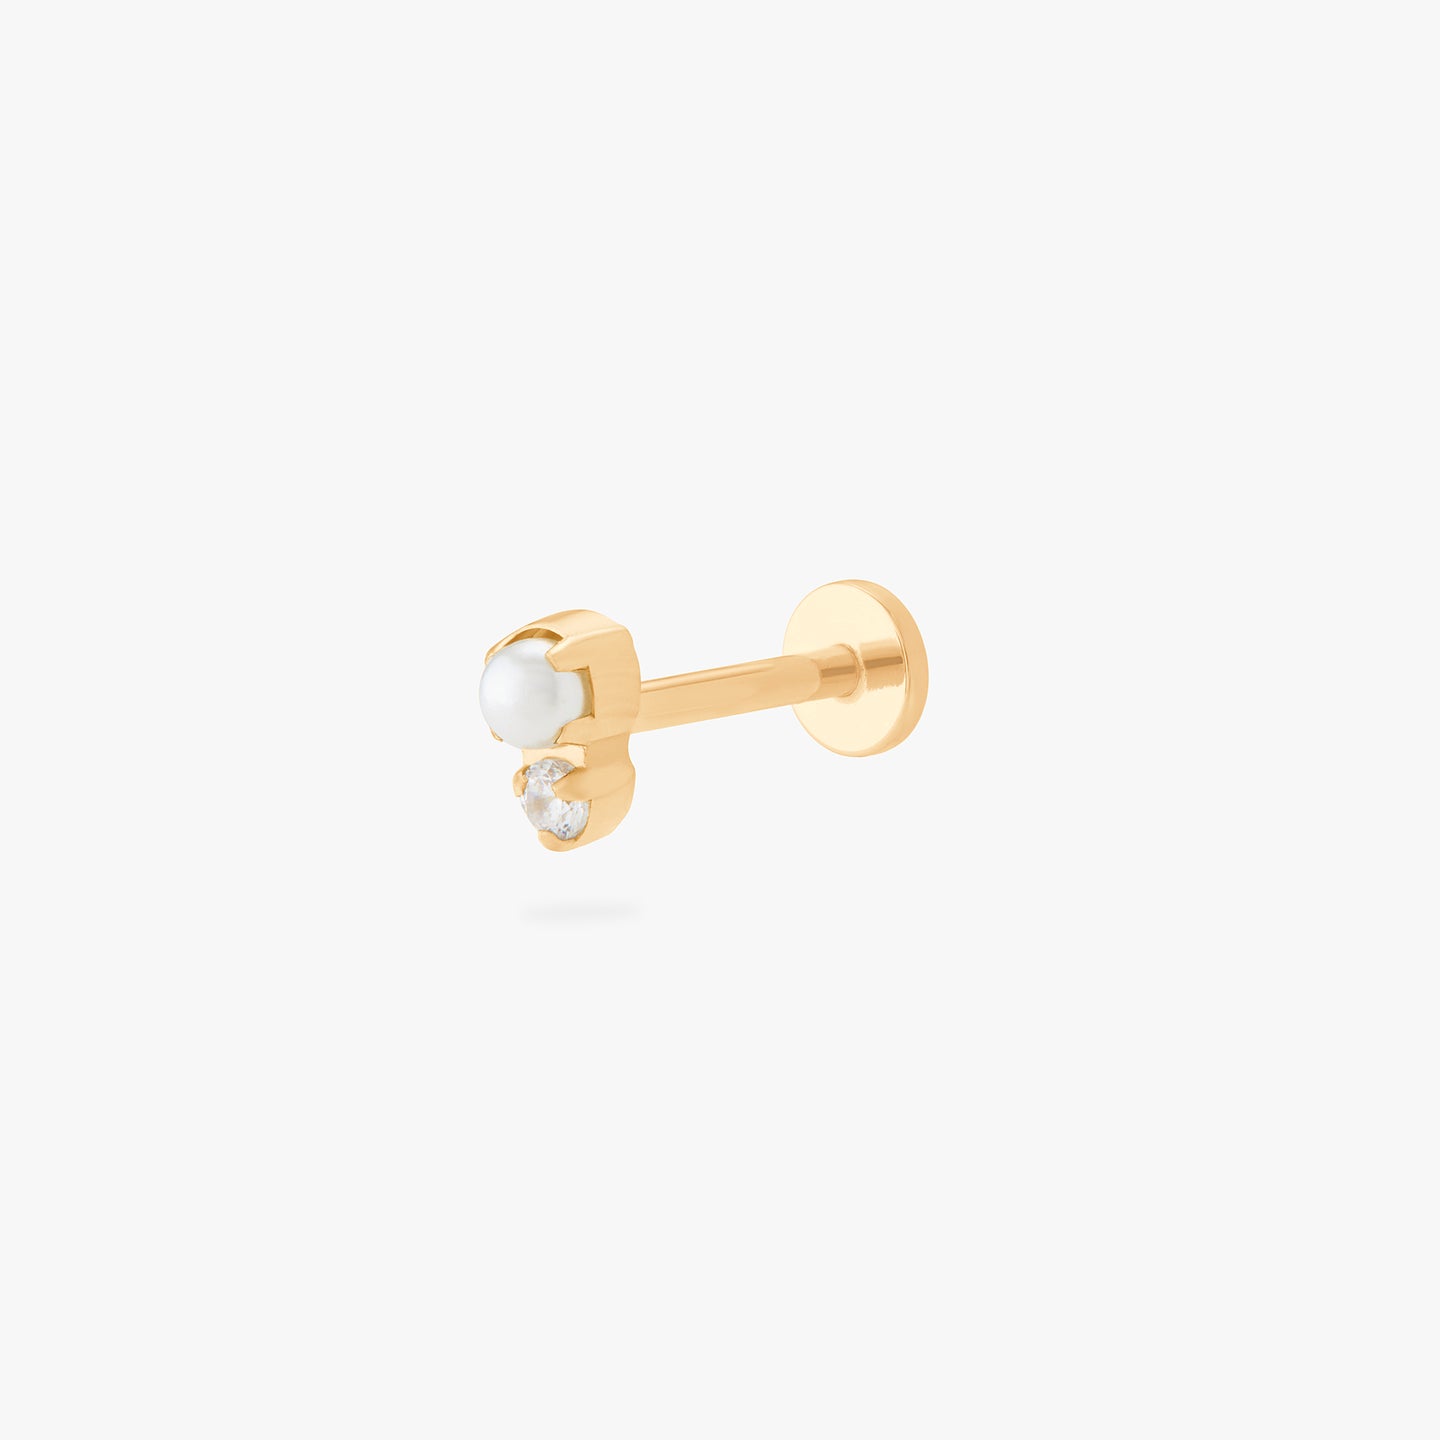 This is an image of a flatback top which has a pearl stacked over gold/clear CZ and then a gold labret that has a circle disc with the 